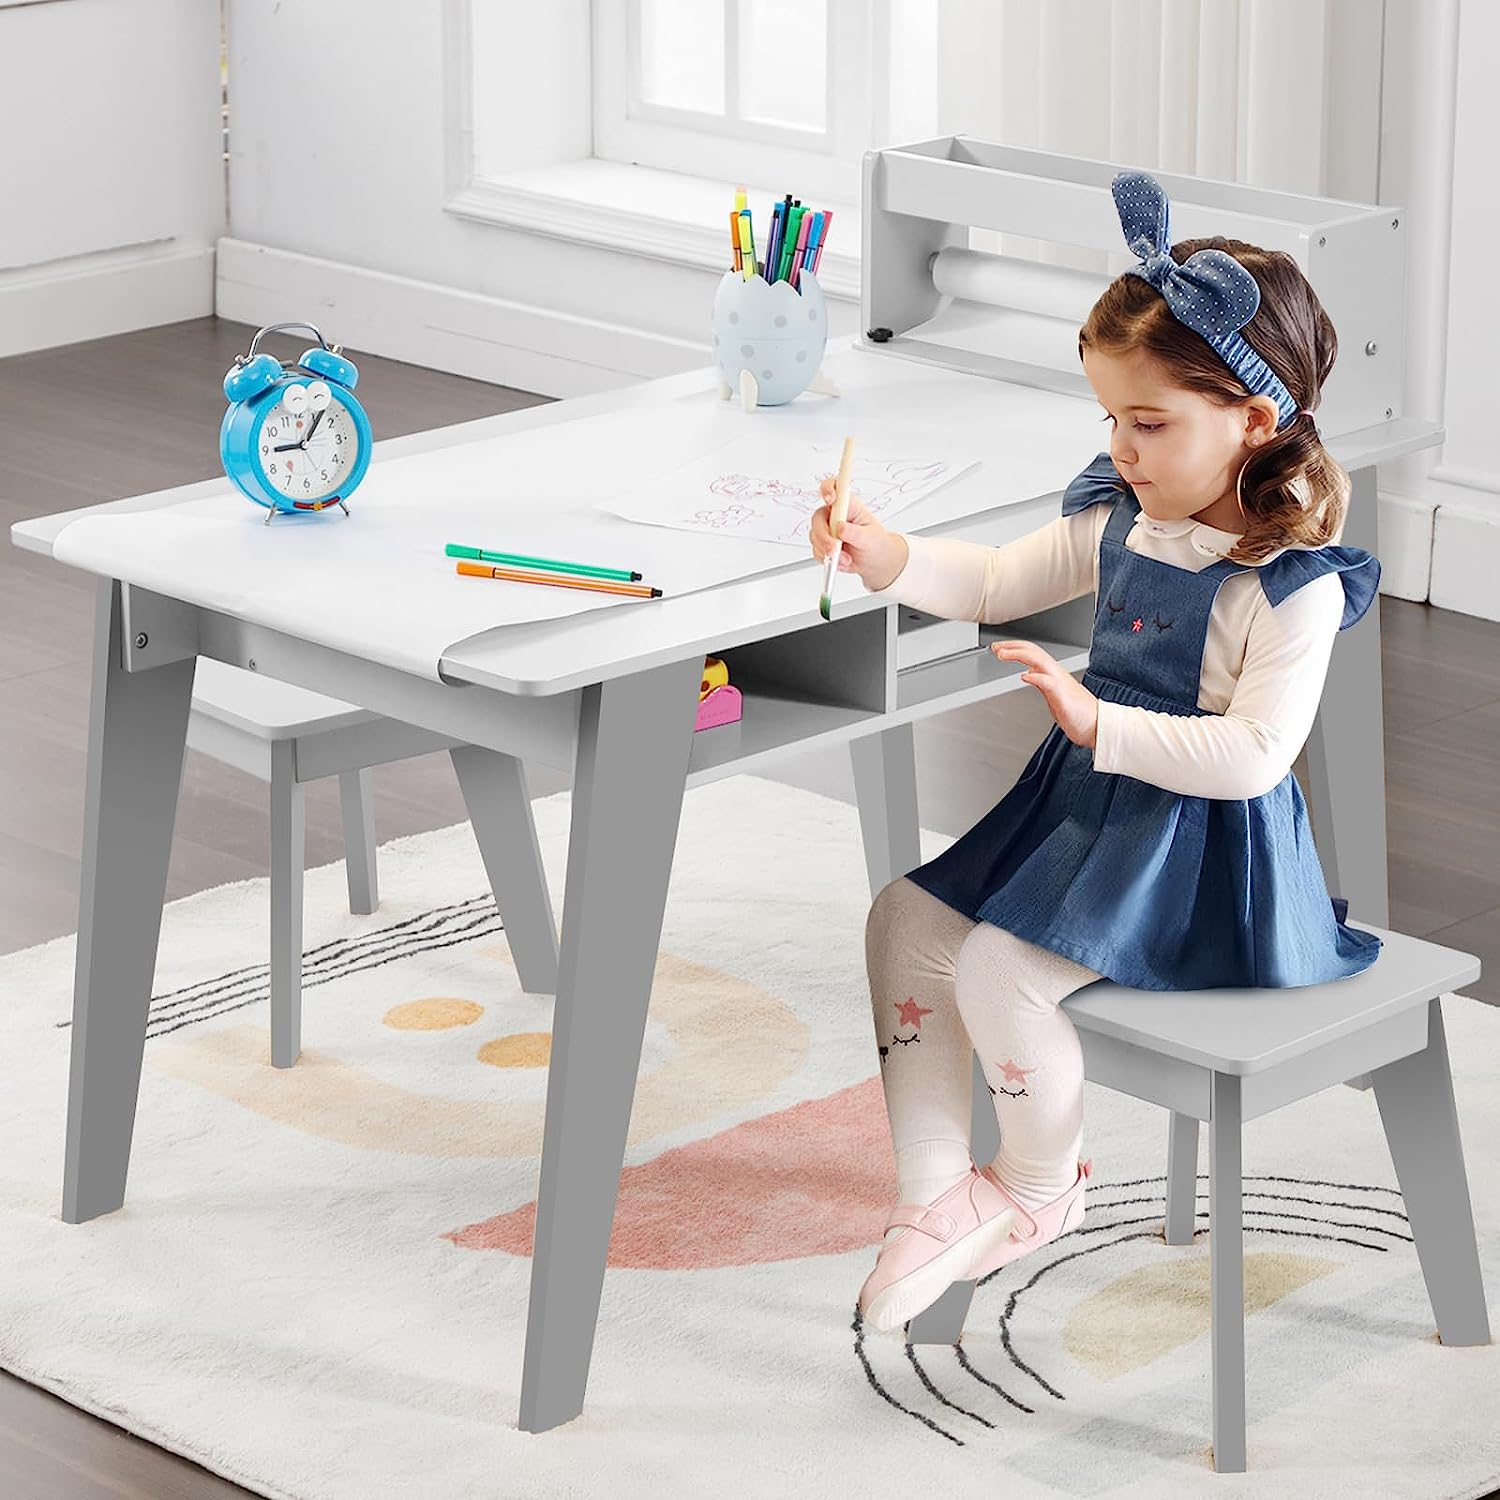 Kids Art Table, 2-In-1 Kids Craft Table and Chair Set , Wooden Paintin –